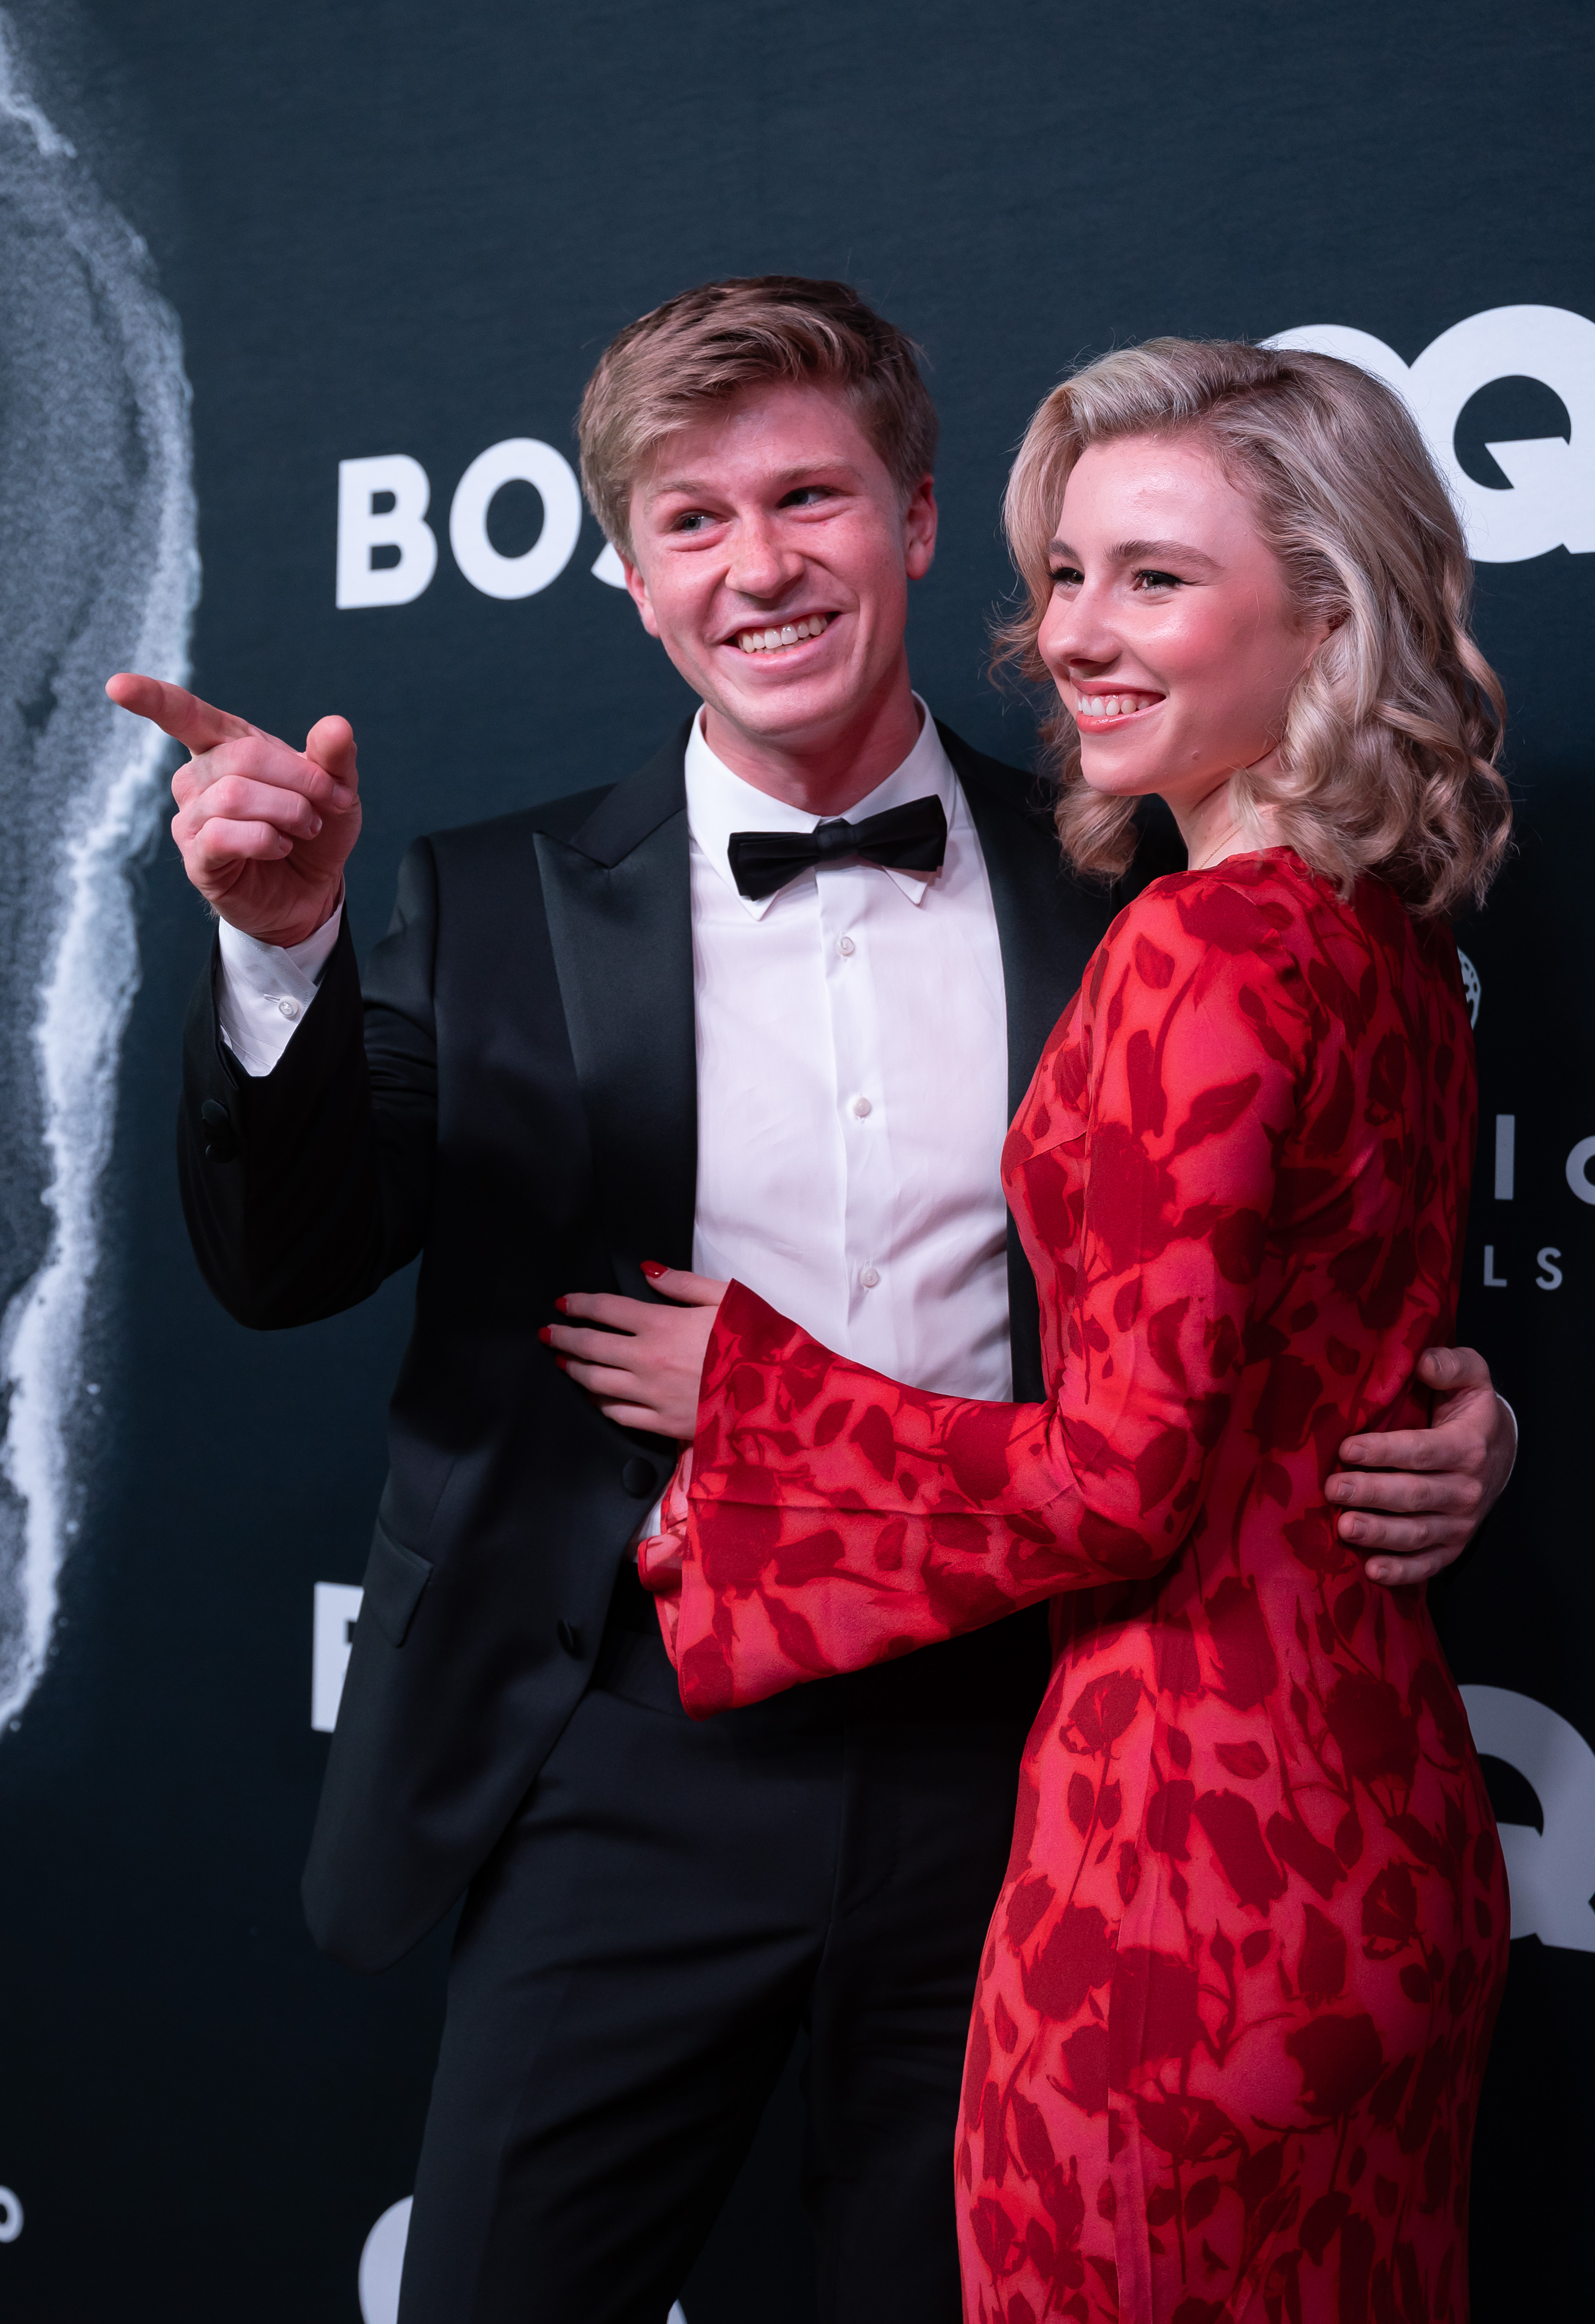 Rorie Buckey and Robert Irwin at the GQ Australia Men Of The Year Awards | Source: Getty Images